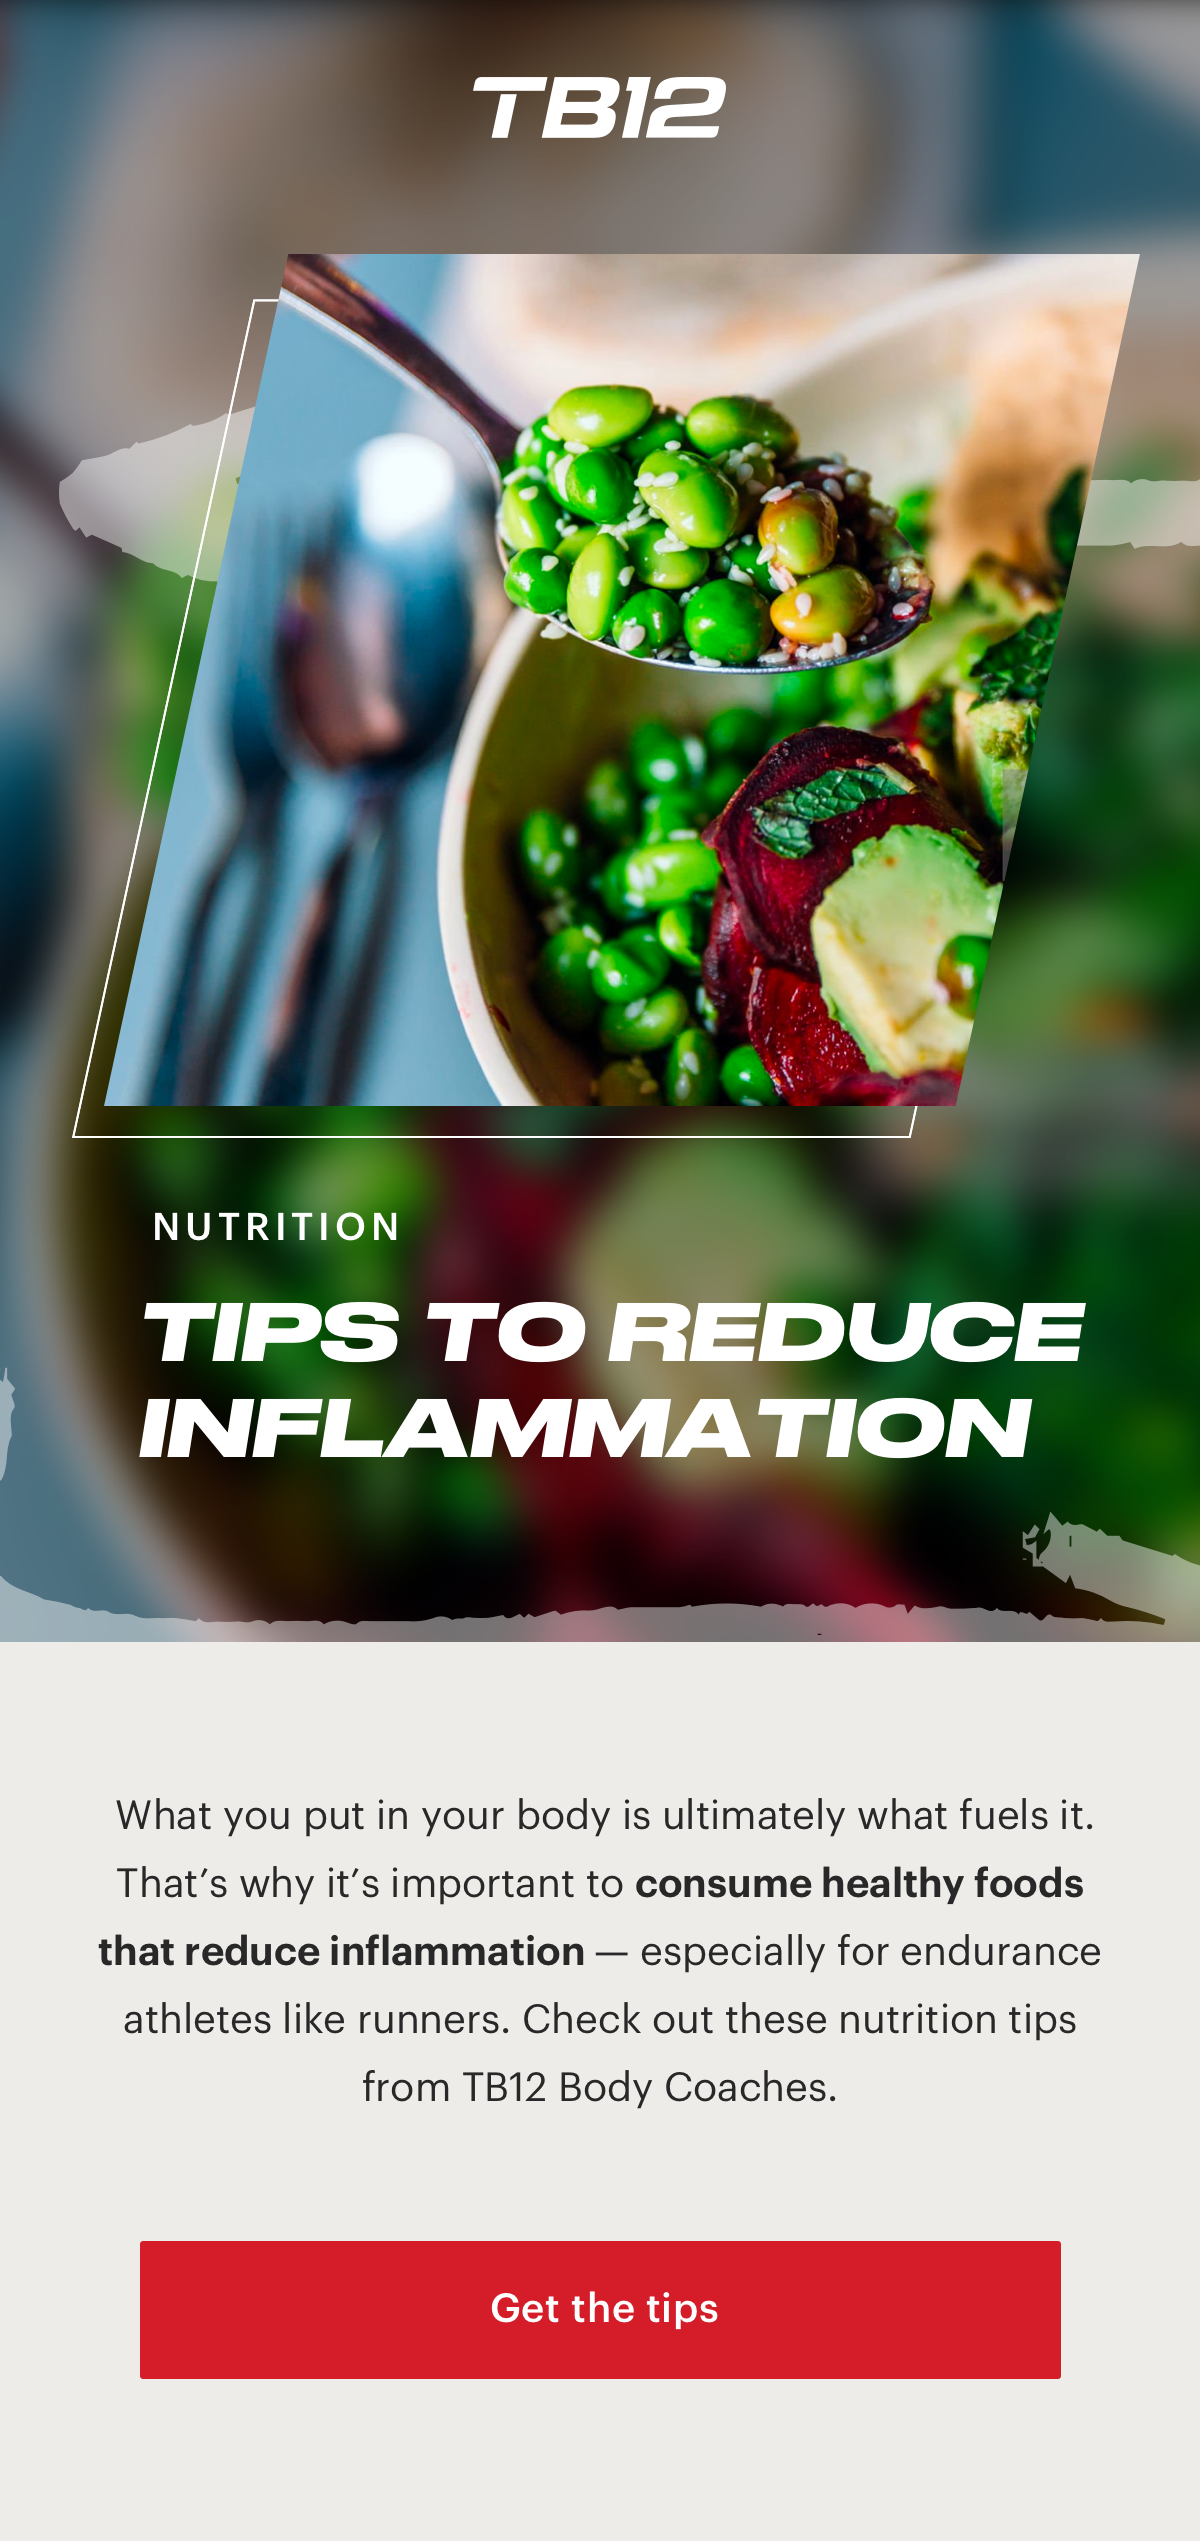 Inflammatory Foods Runners Should Avoid